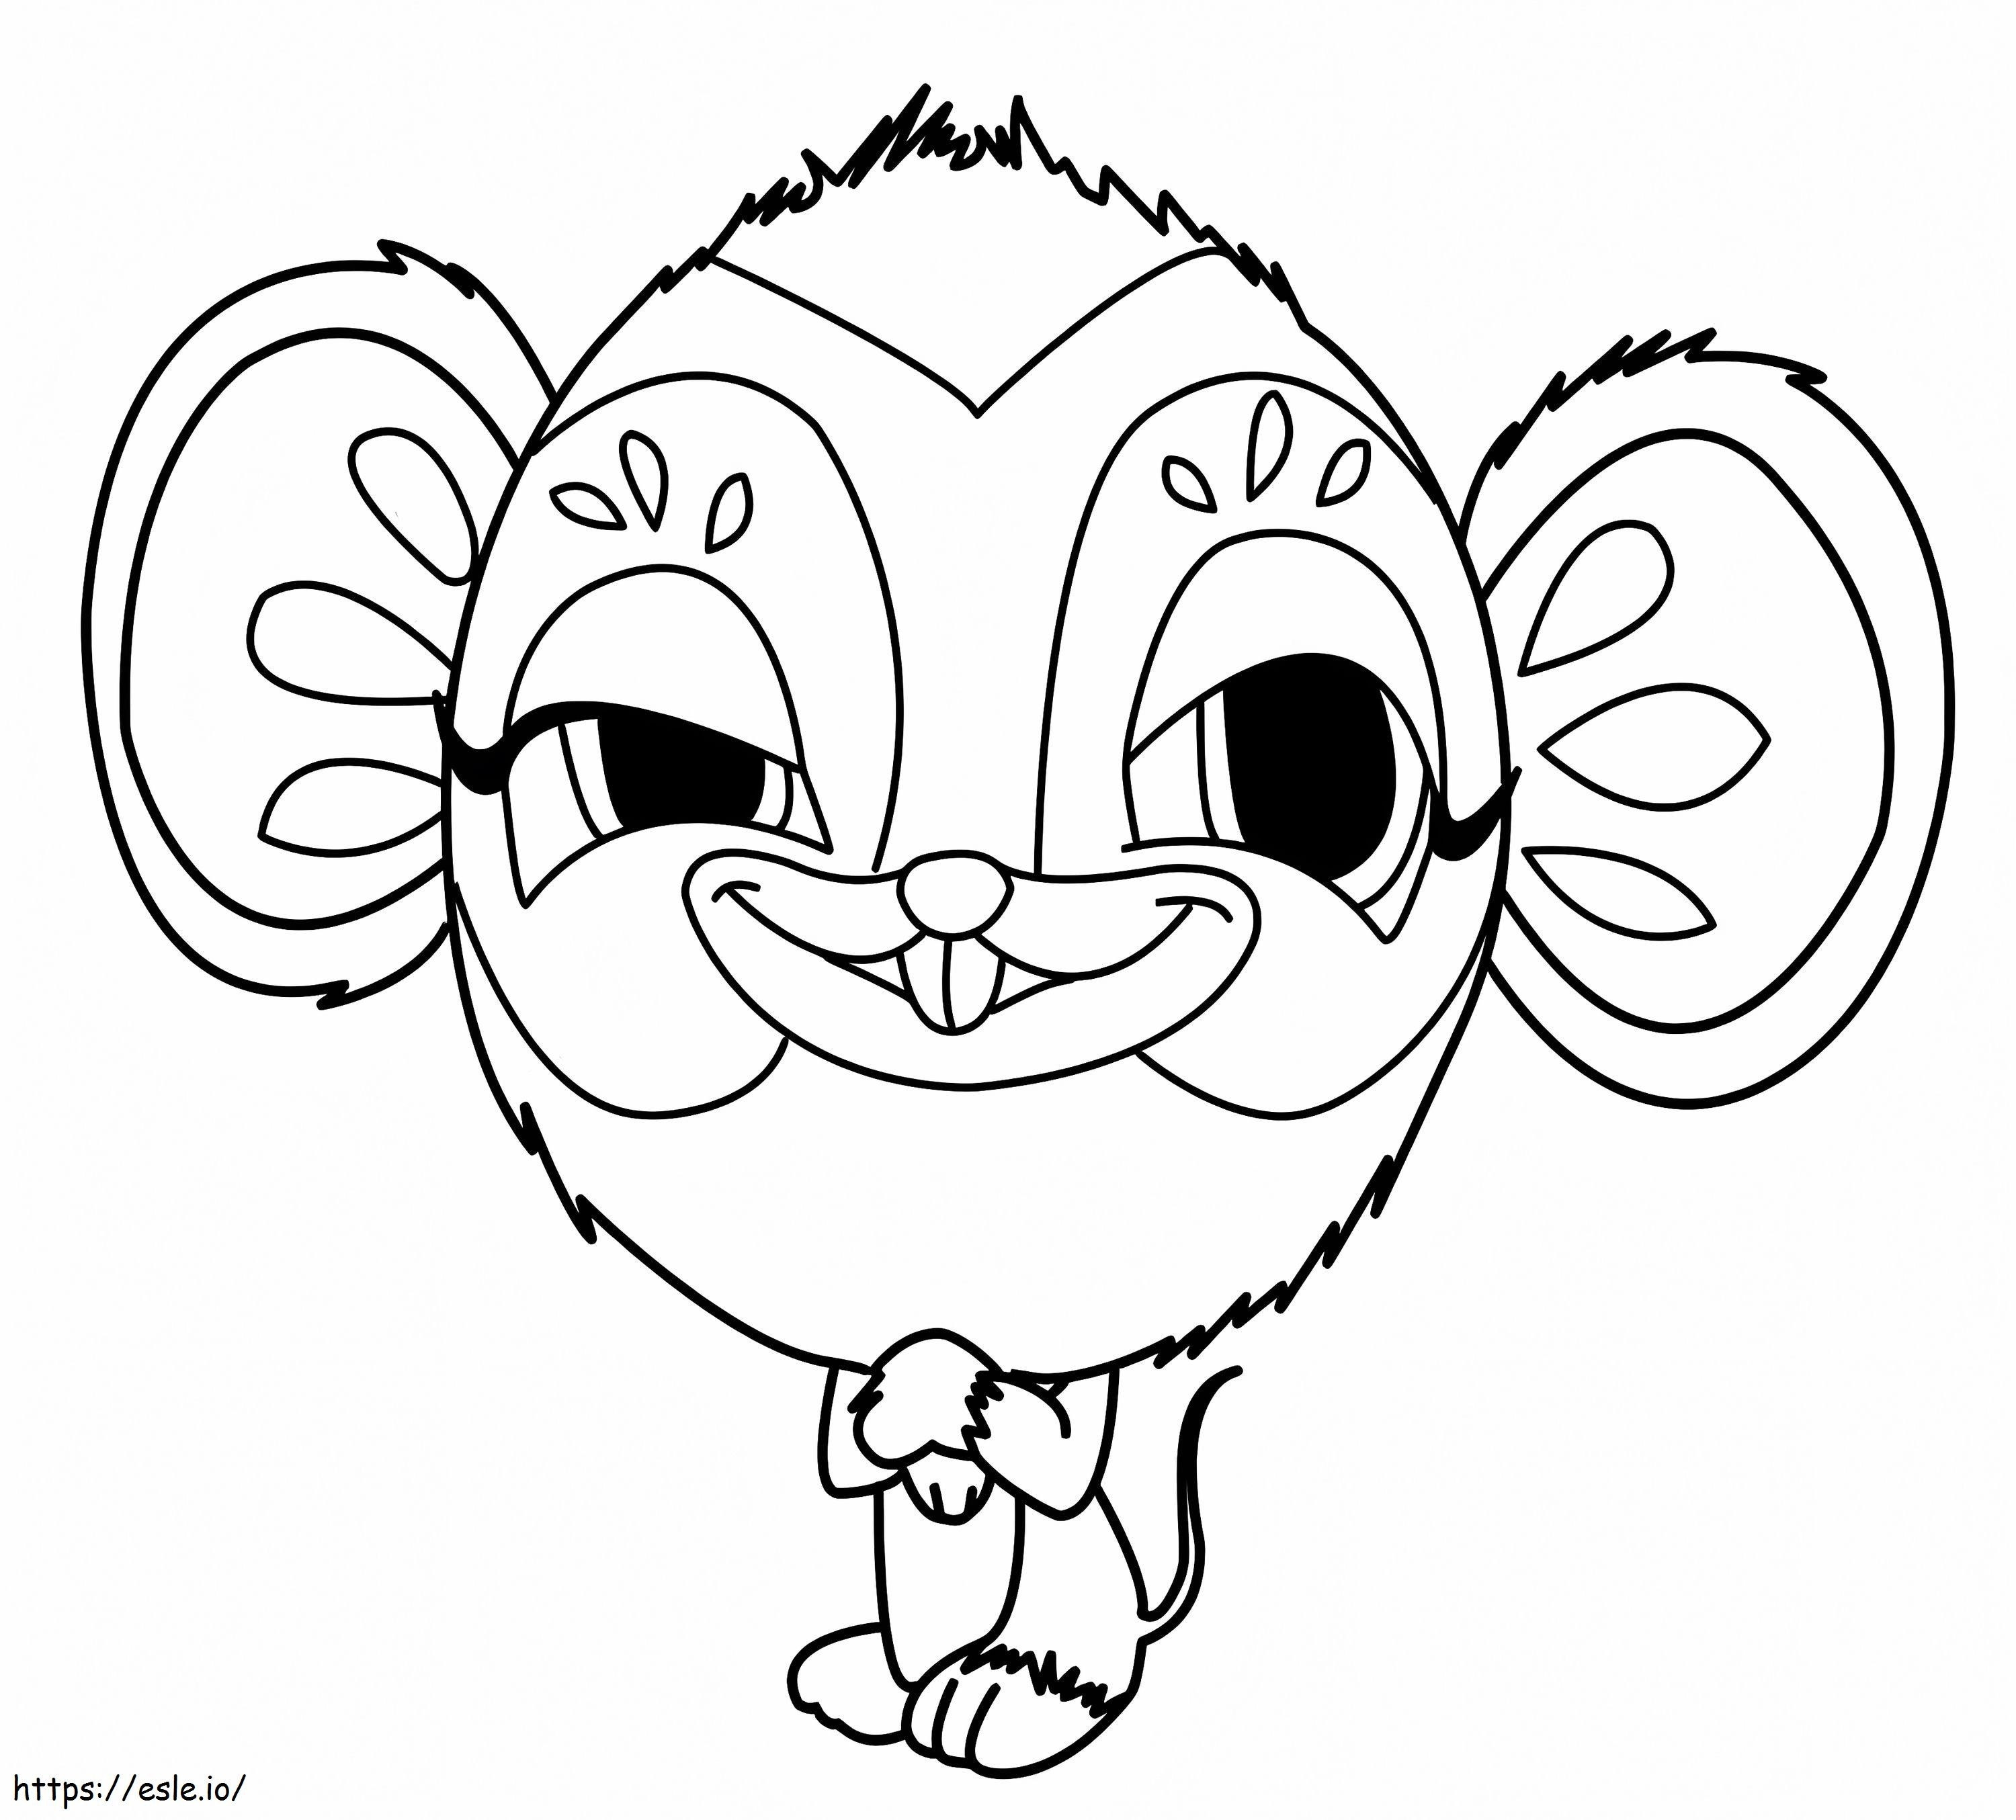 Zooble Mouse coloring page